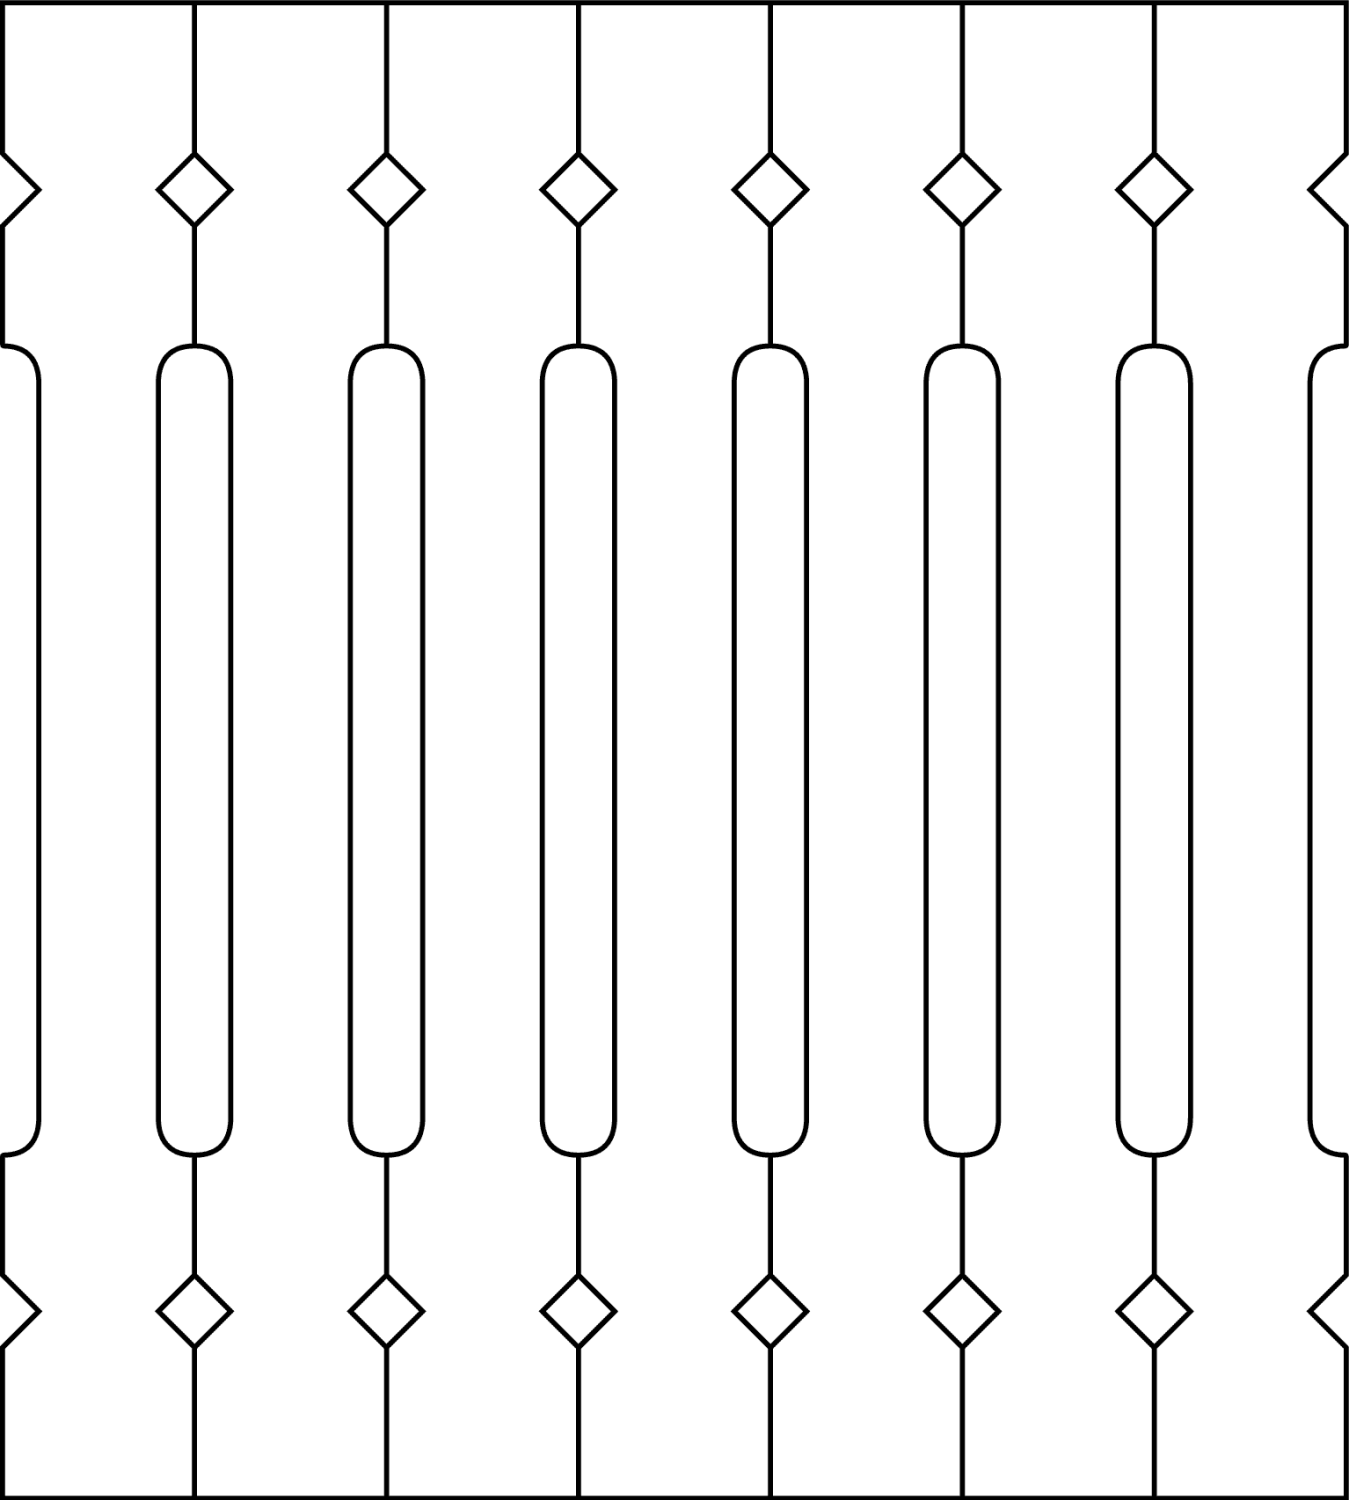 Baluster 005 - The drawing shows 7 Decorative victorian sawn balusters & pickets together